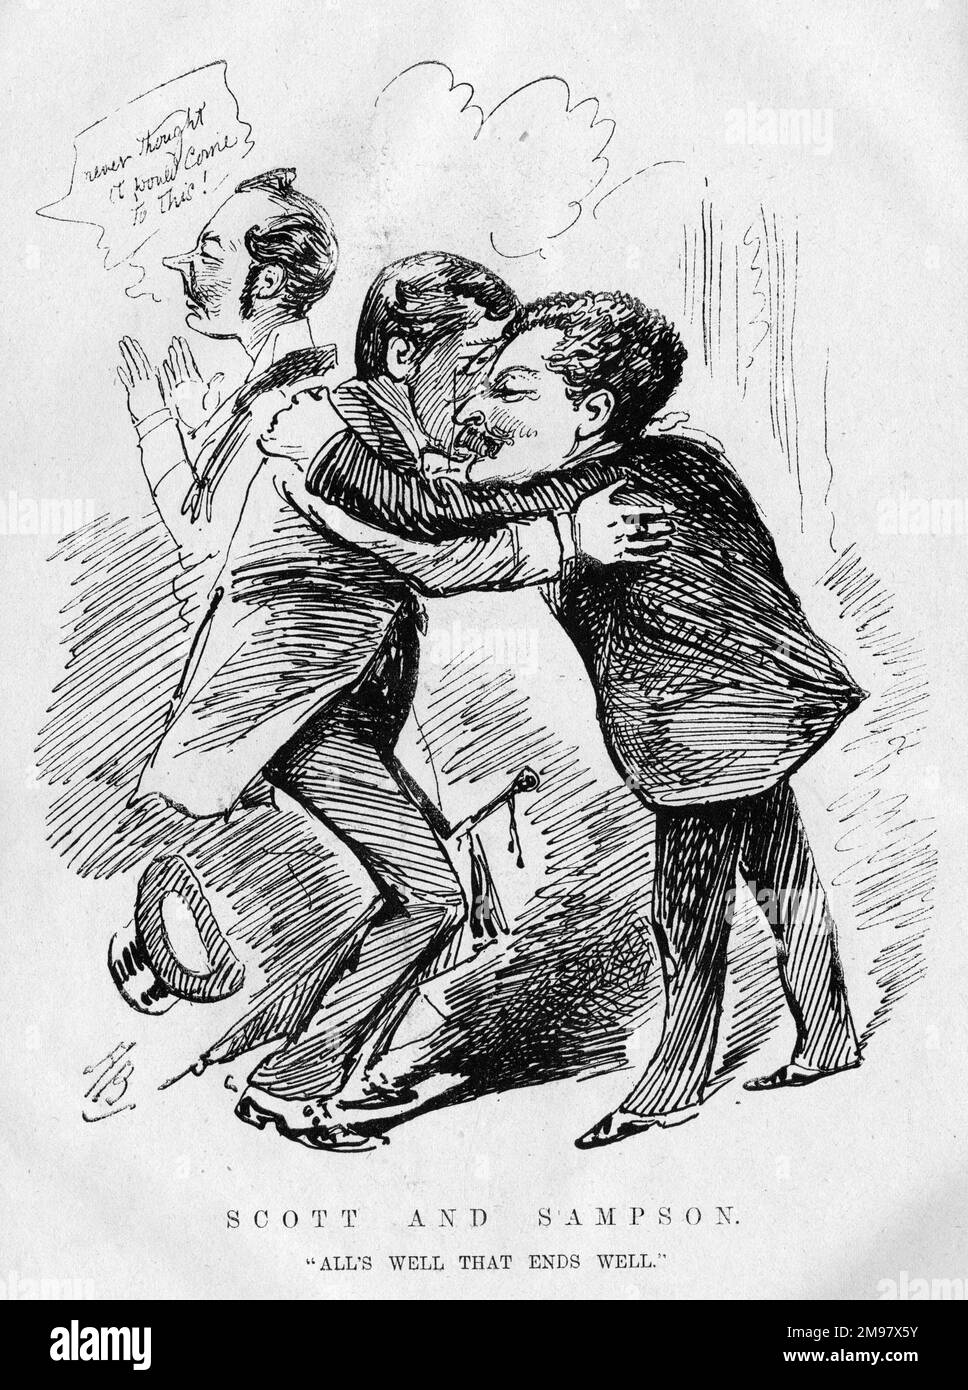 Cartoon of Edward Ledger (18??-1921), editor of The Era theatrical newspaper, commenting on a reconciliation between Clement William Scott (1841-1904), influential English theatre critic, and Henry Sampson (1841-1891), English newspaper proprietor and editor. There had been a court case to do with defamation of character, but it seems to have been resolved -- All's Well That Ends Well. Stock Photo